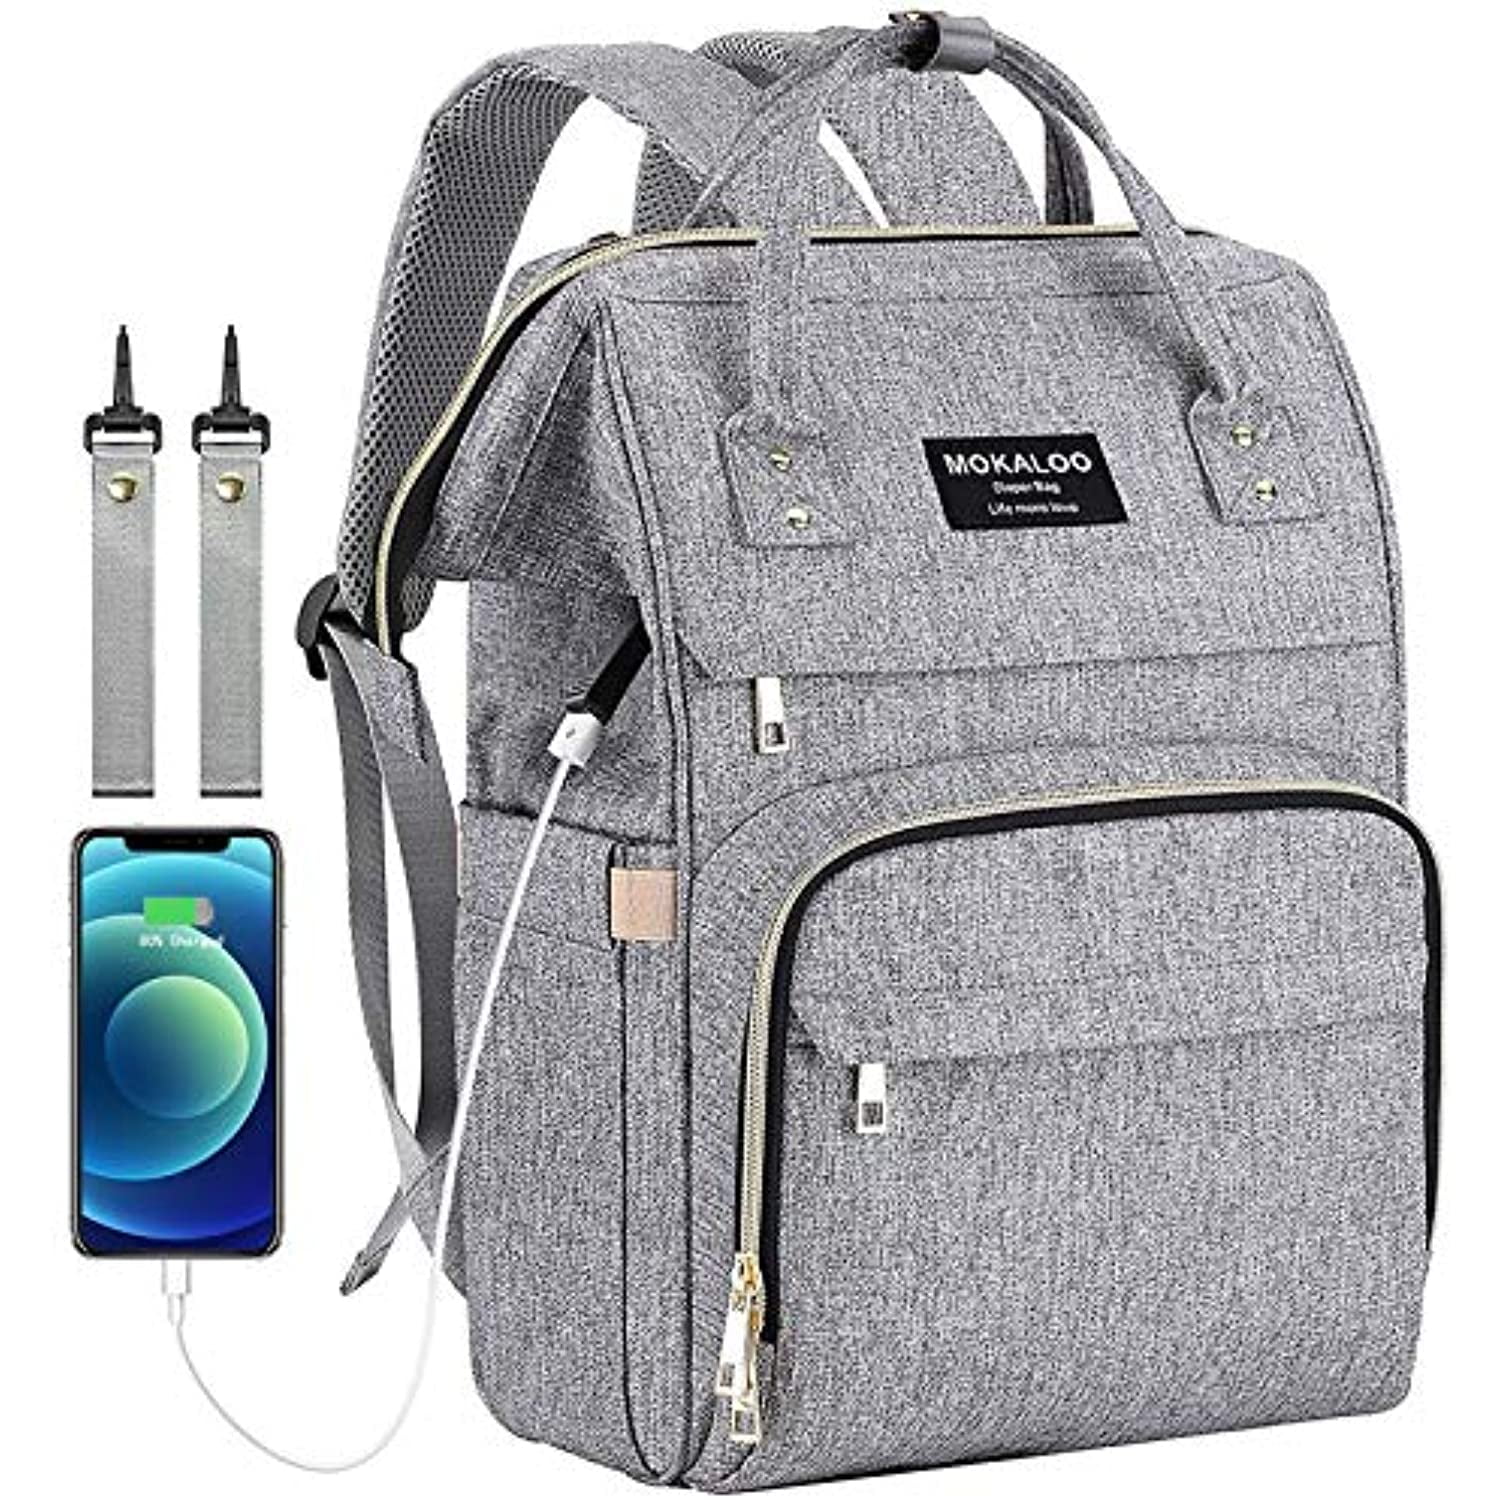 Changing Bag Backpack Multi-Function Baby Diaper Bag Waterproof Nappy Rucksack Travel Back Pack Changing Bags with USB Port Insulated Pockets Stroller Hooks Large Capacity 